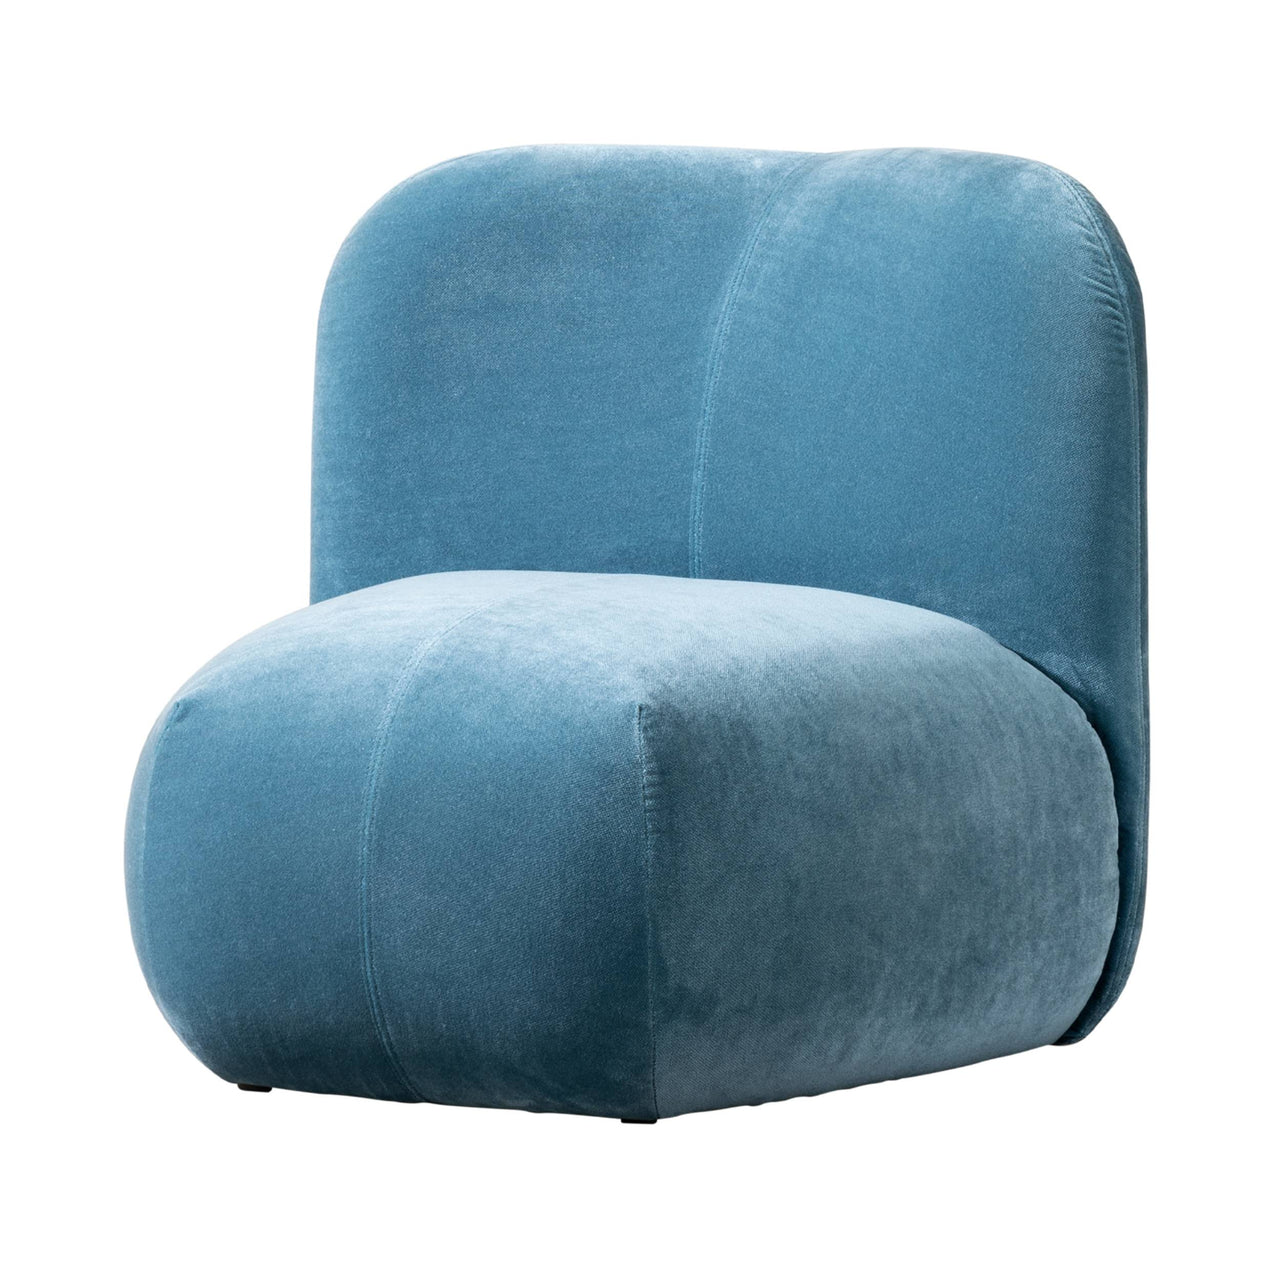 Boterina Armchair: Without Cover